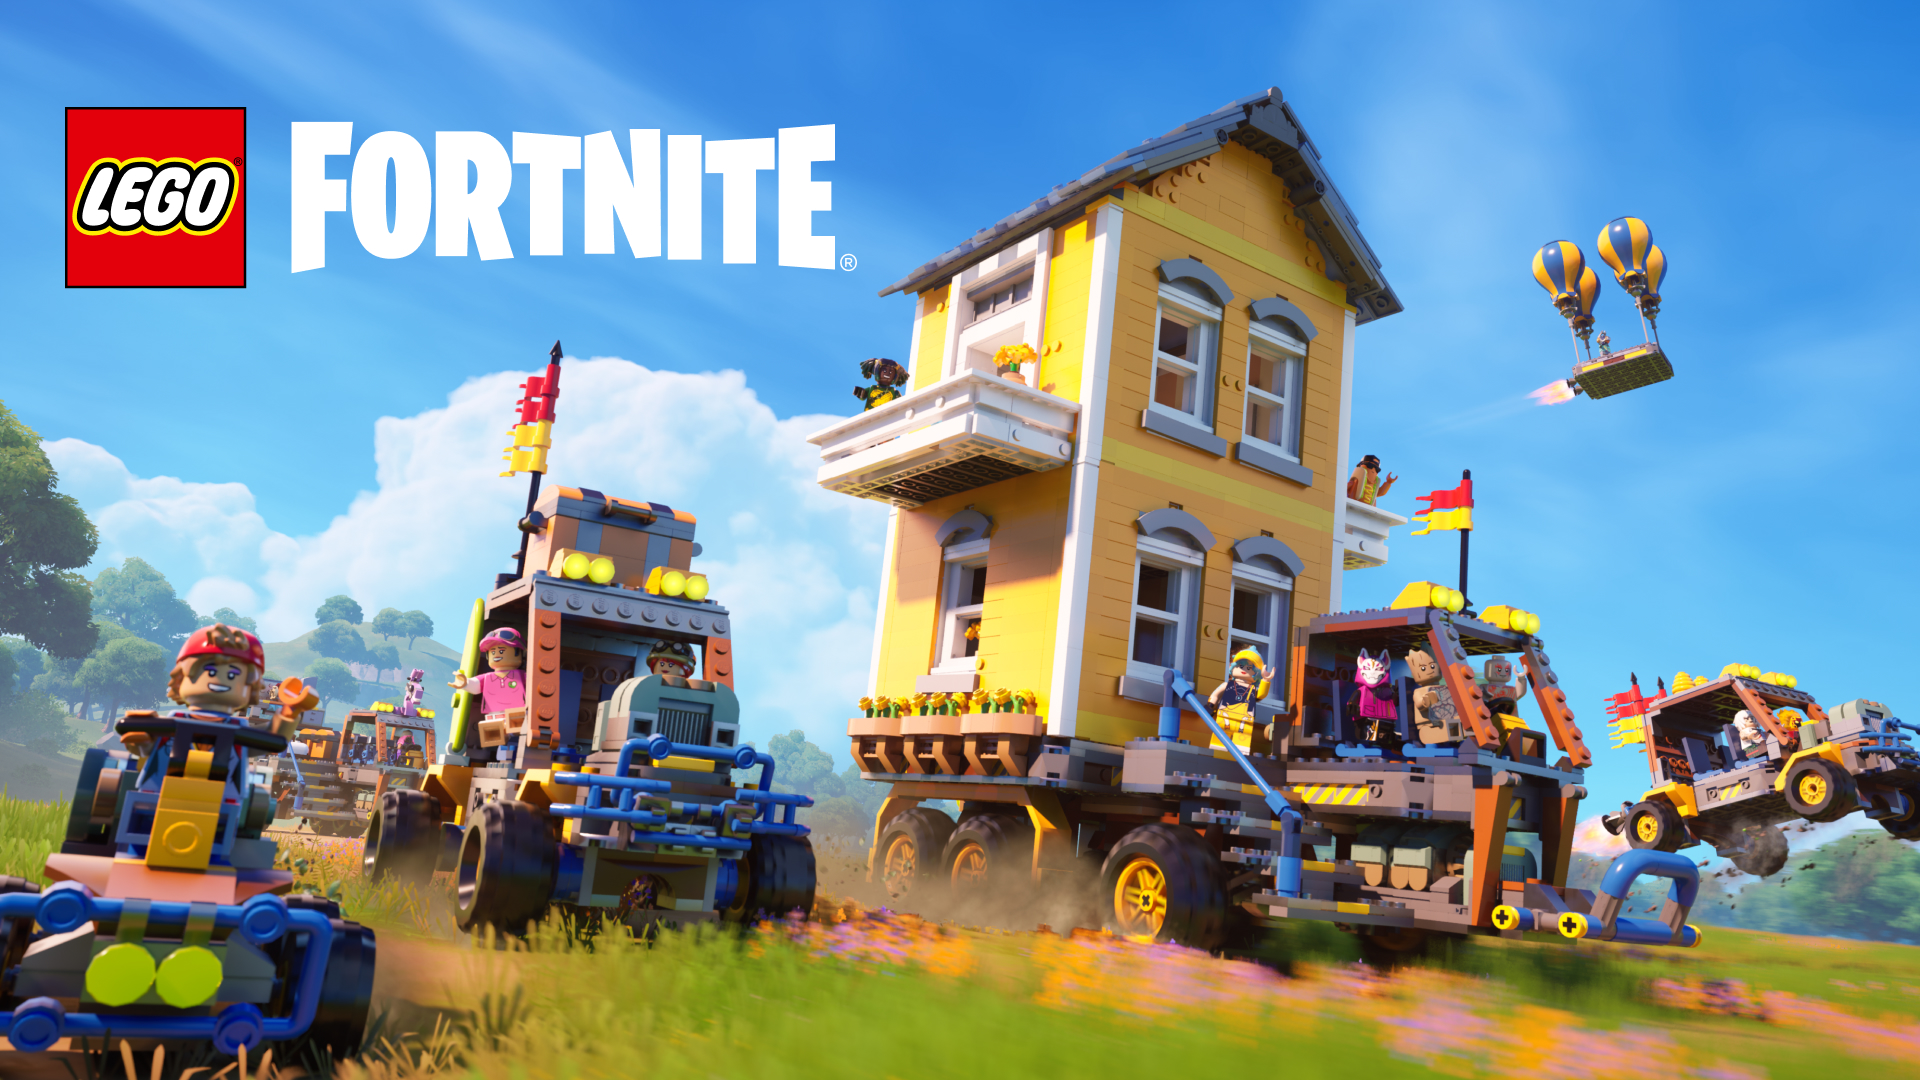 Main header for the Mechanical Mayhem update, showing characters driving a whole host of new vehicles around a town square. The Lego Fortnite logo is shown in the top left of the image.